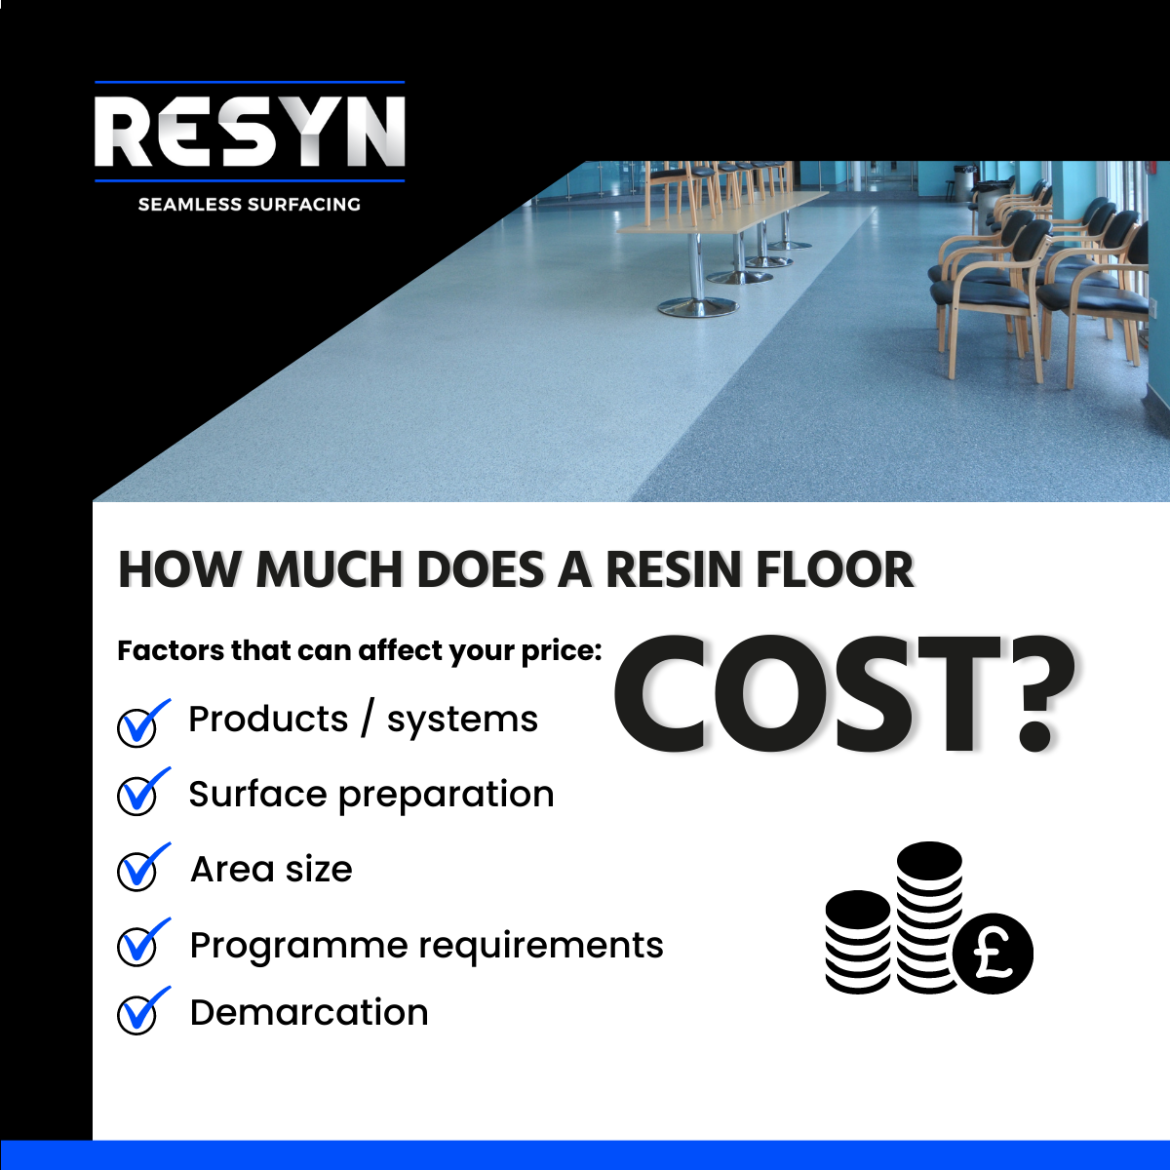 How much does a resin floor cost? Seamless surfacing by RESYN